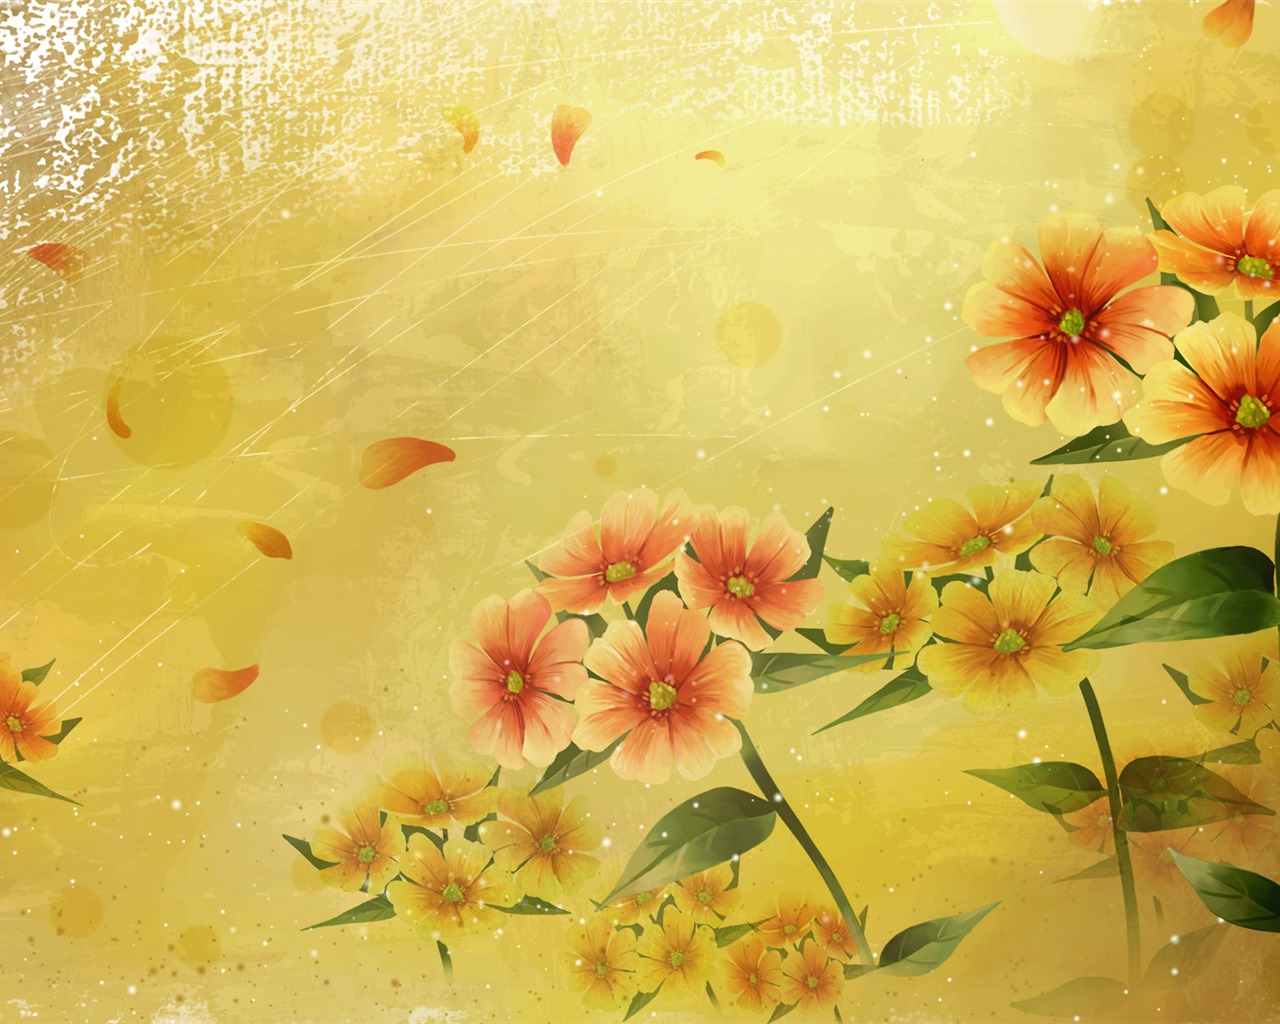 Synthetic Wallpaper Colorful Flower #33 - 1280x1024